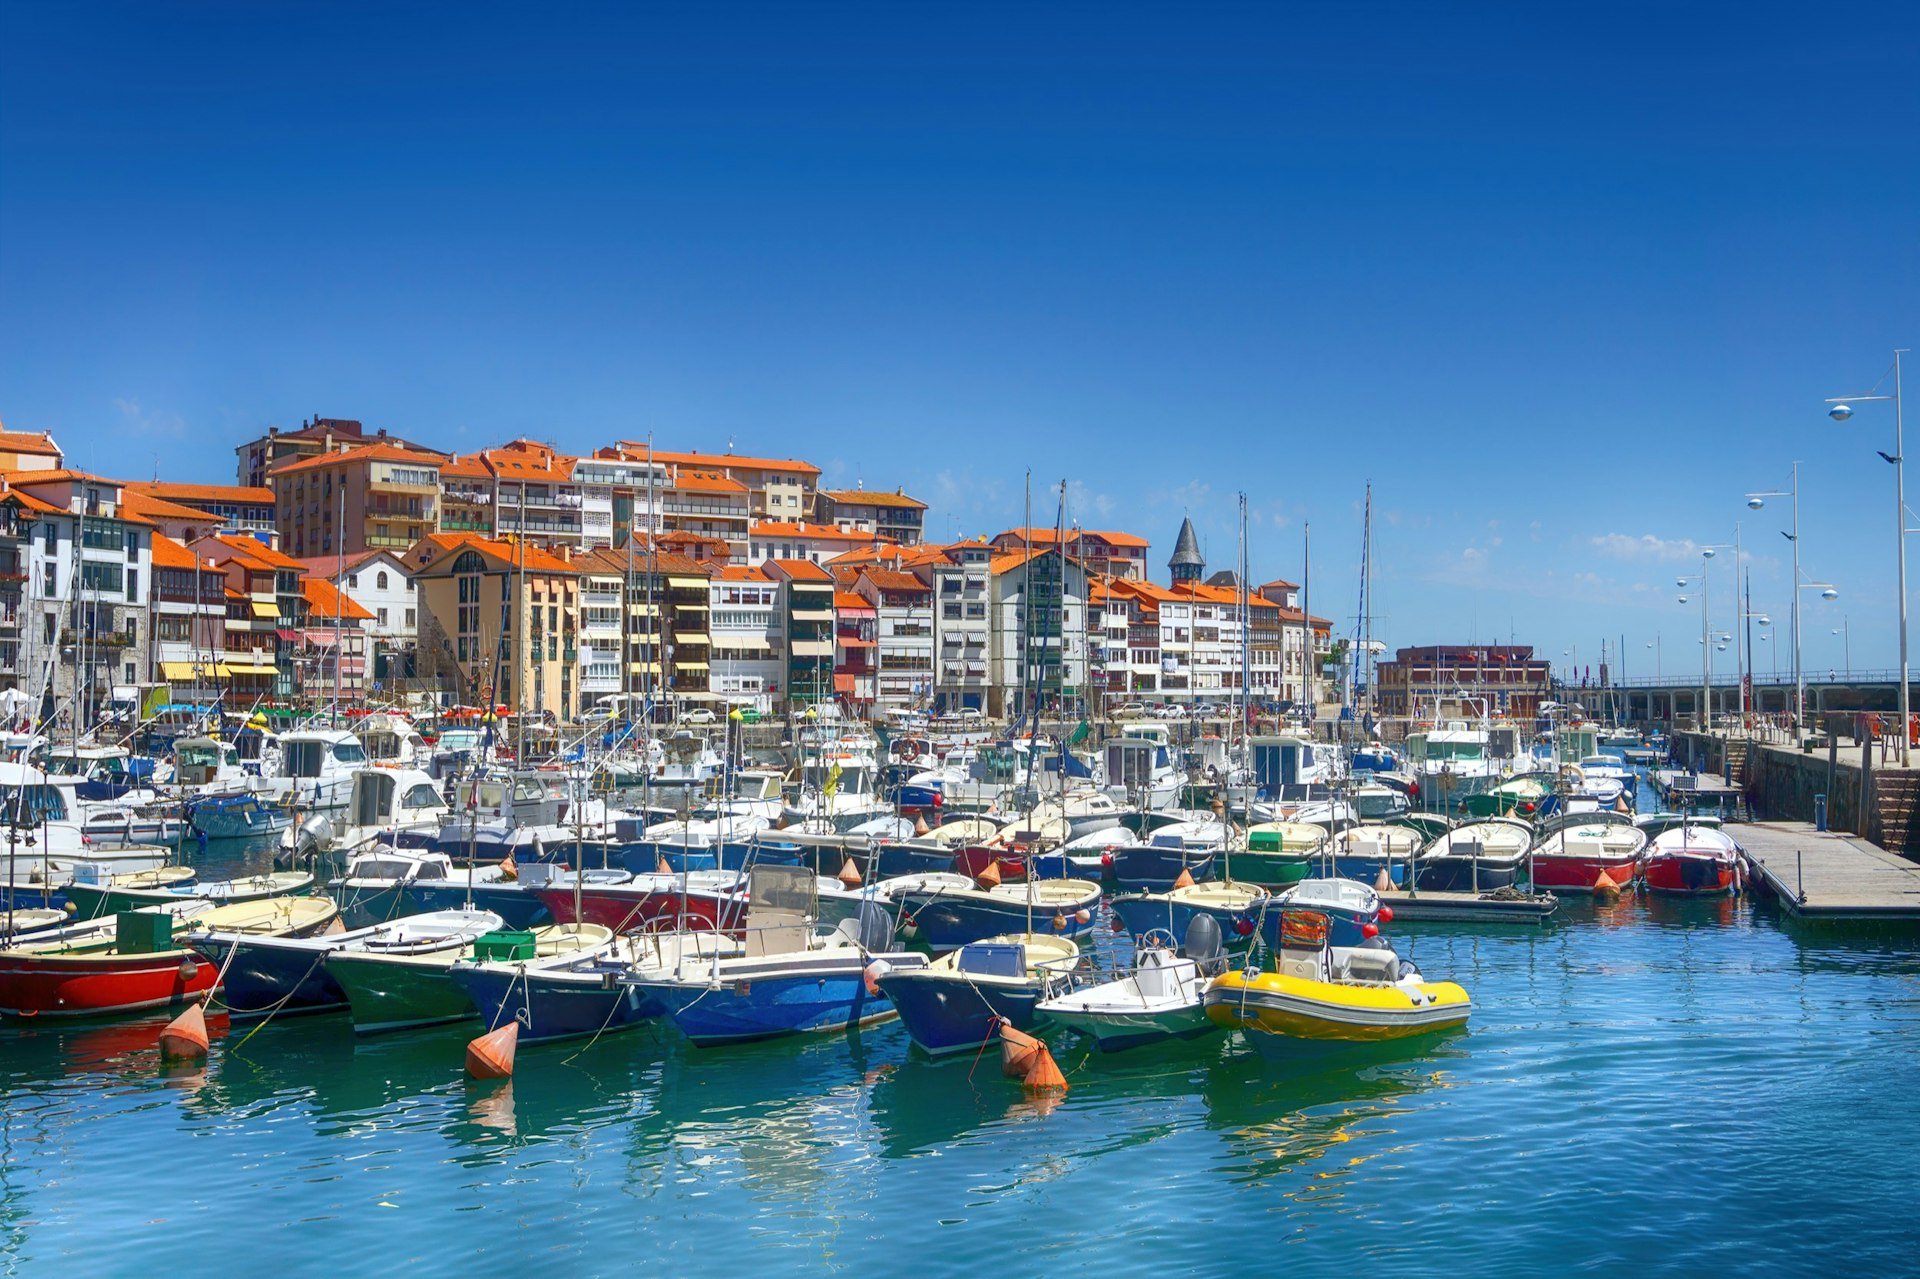 Boats at Lekeitio village and port in Basque Country, Spain